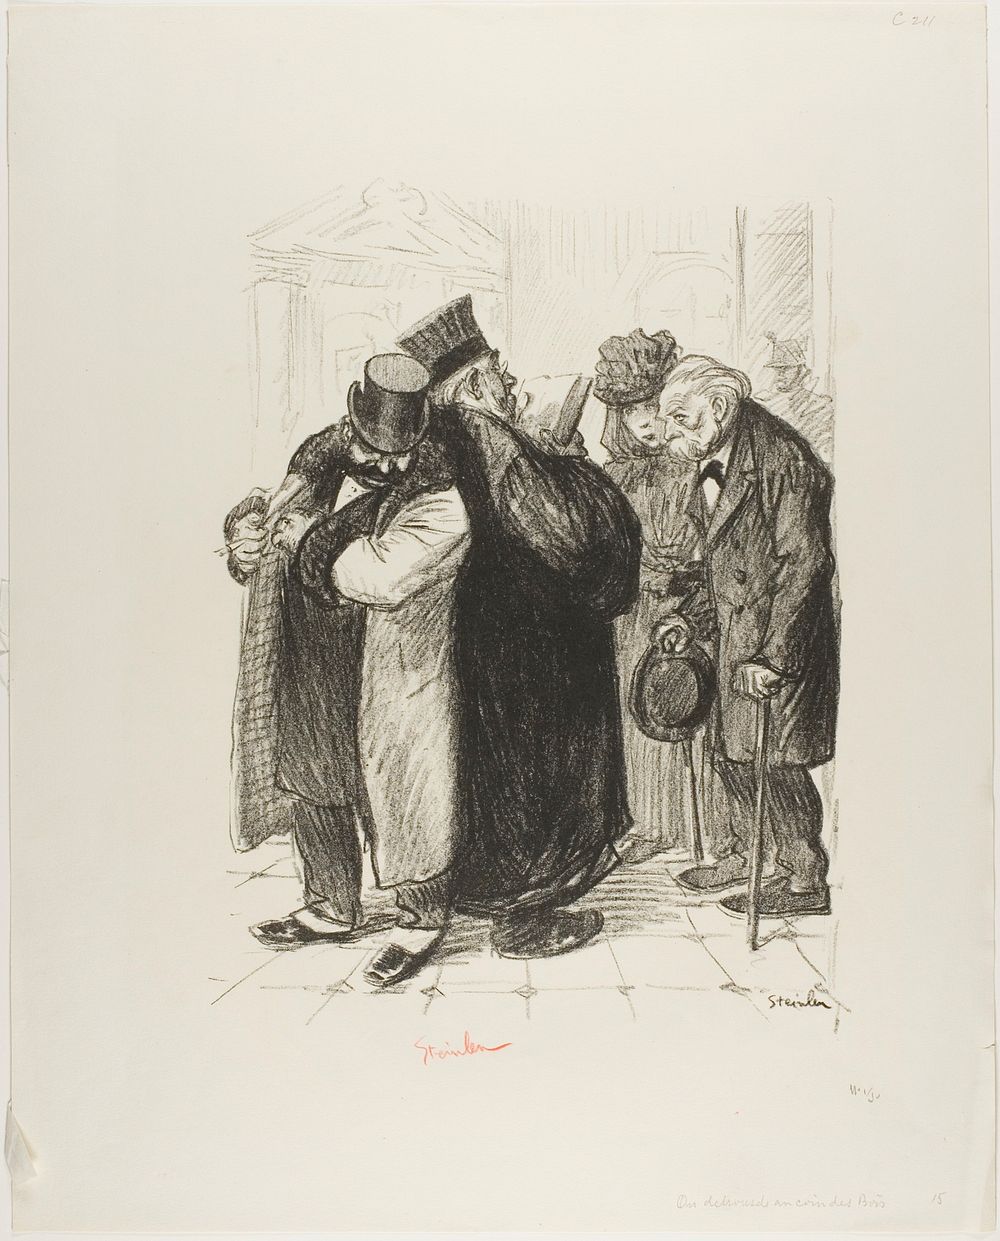 One Robs on the Side of the Law by Théophile-Alexandre Pierre Steinlen